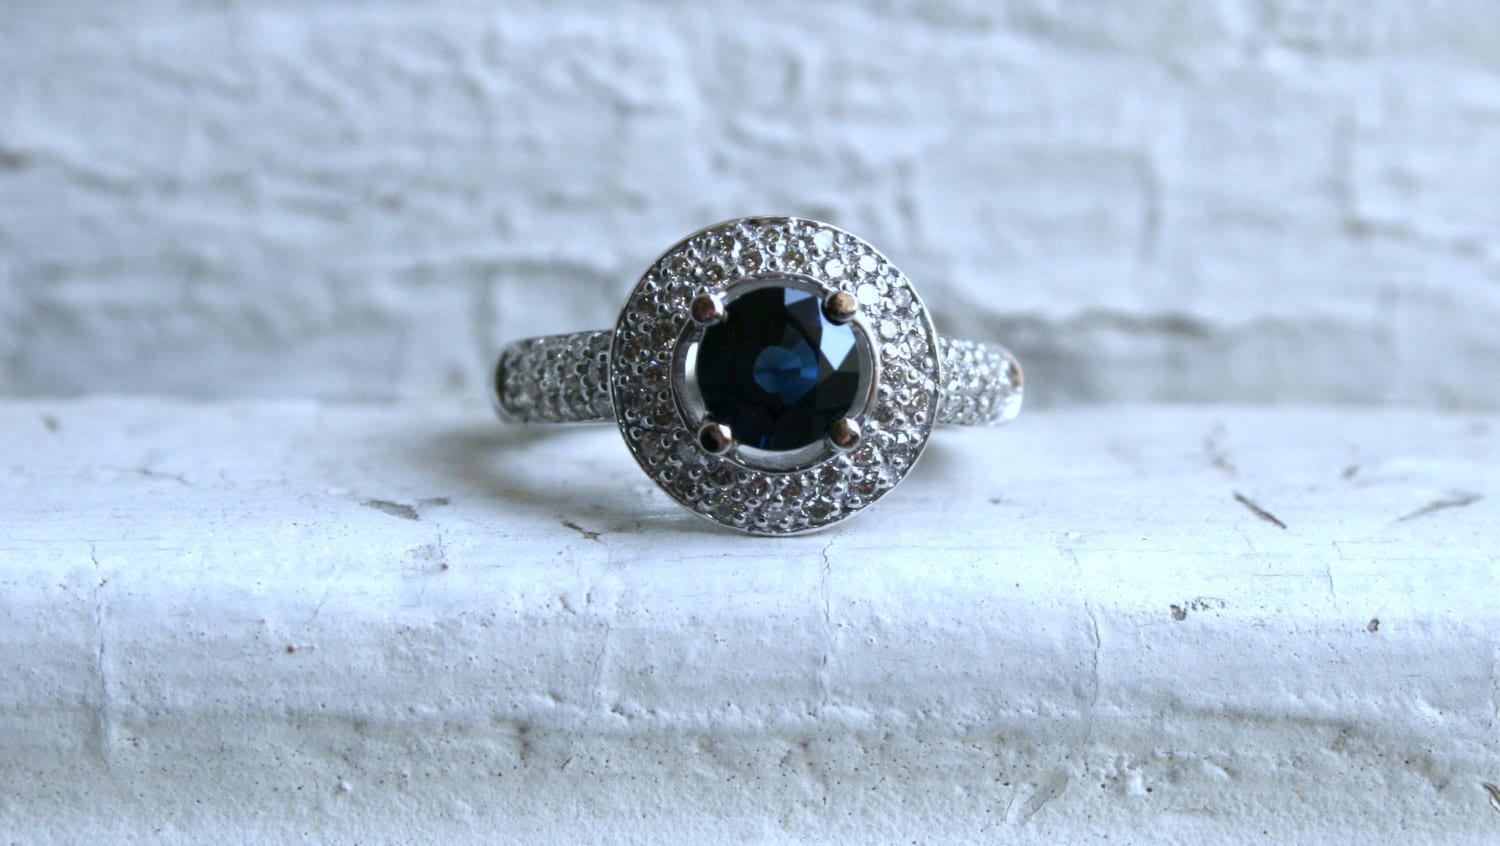 Vintage 14K White Gold Pave Diamond and Sapphire Halo Ring - 1.89ct.